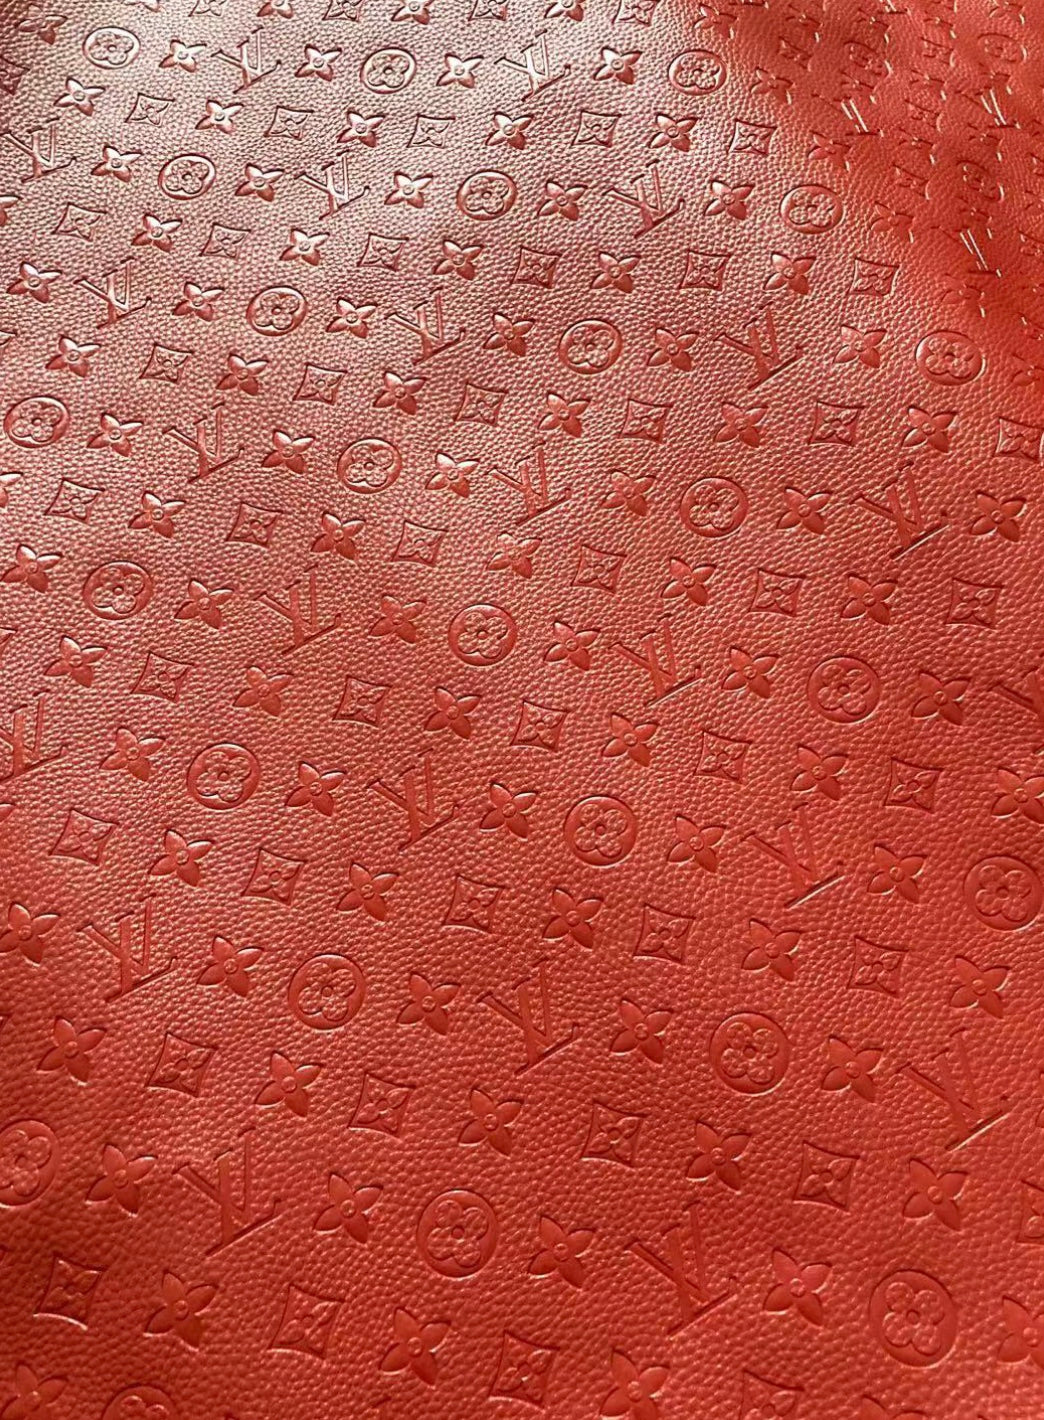 Soft Pure Red Embossed LV Leather for Custom Shoes Upholstery